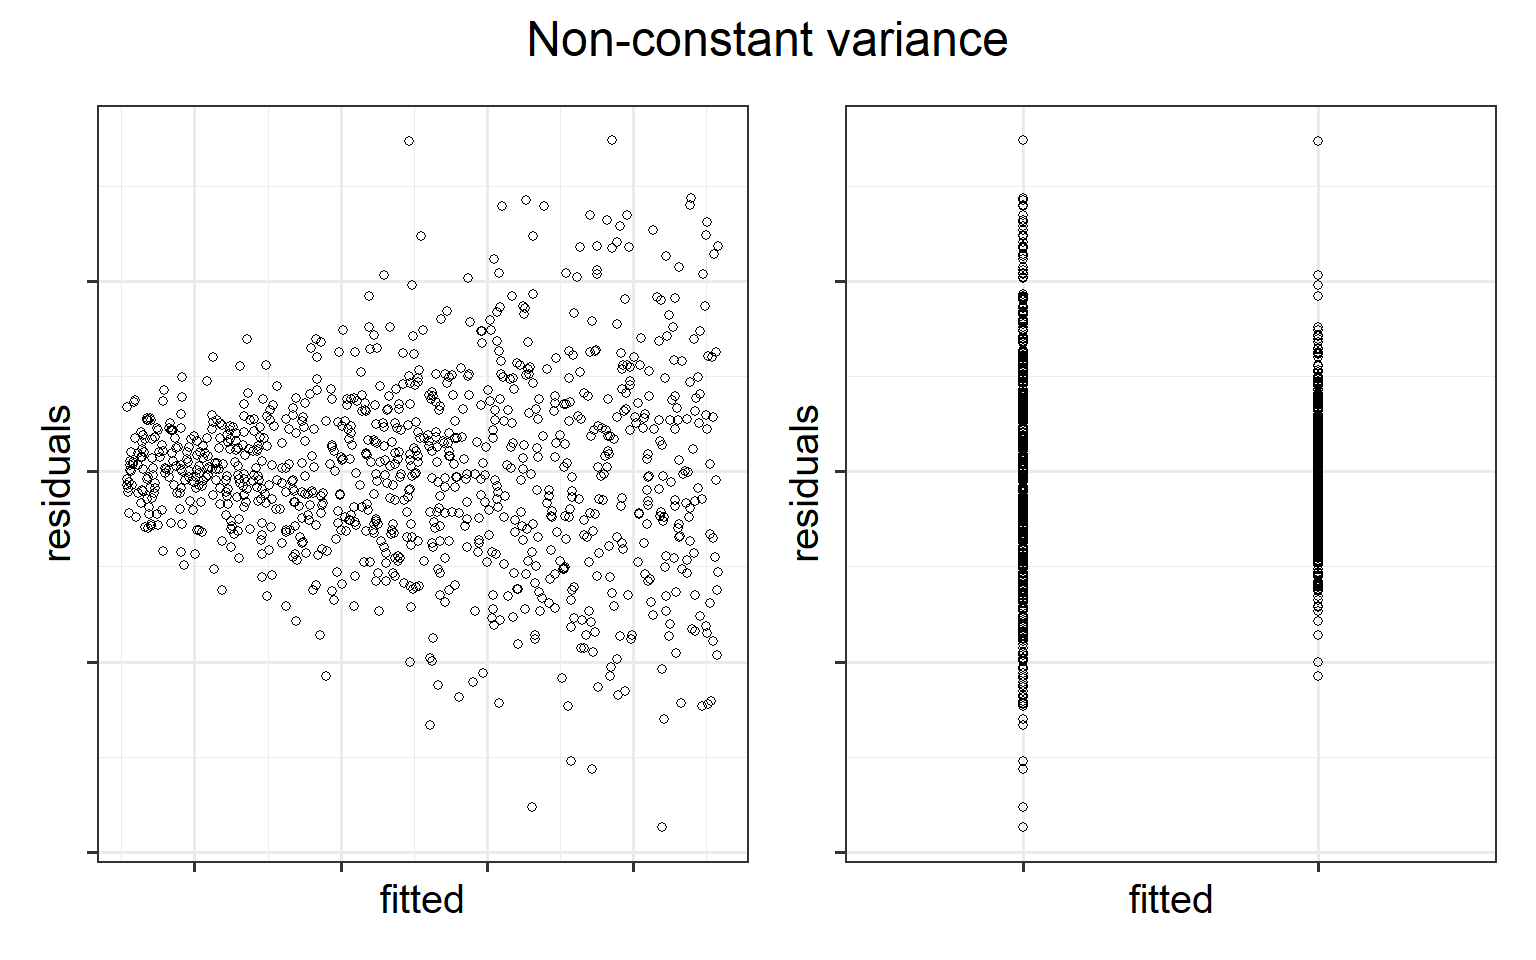 Non-constant variance for numeric and categorical x